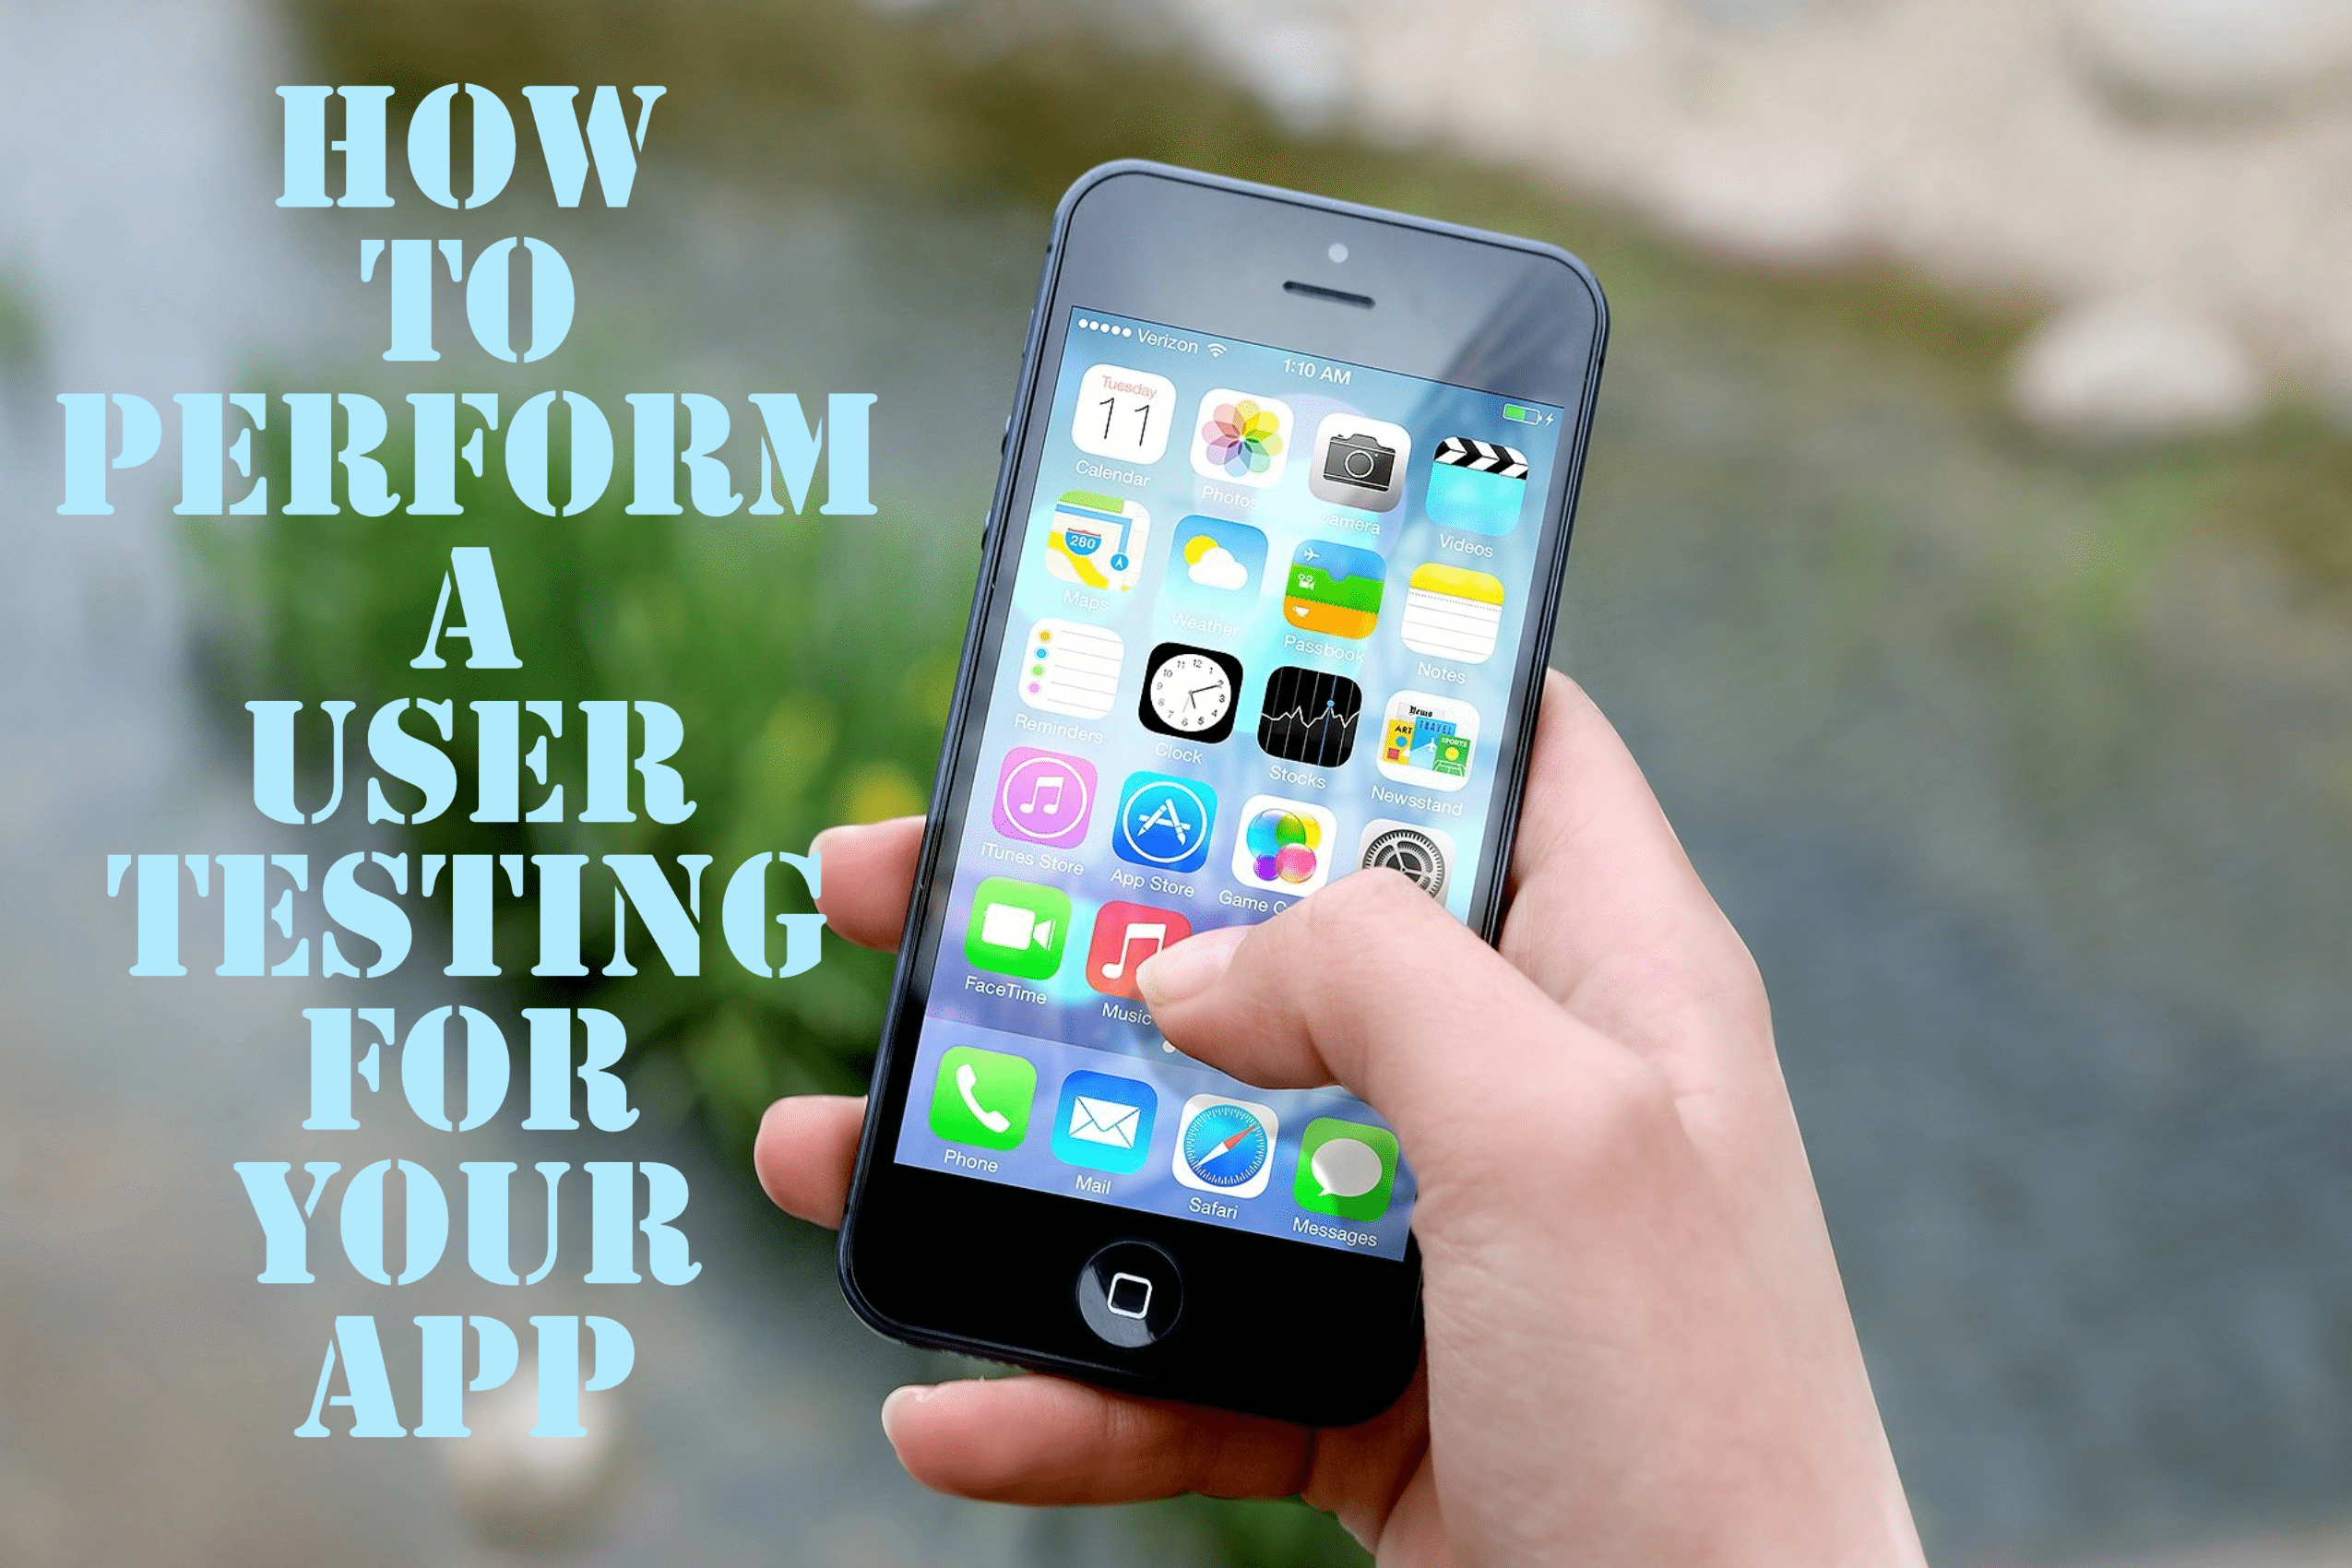 How To Perform A User Testing For Your App